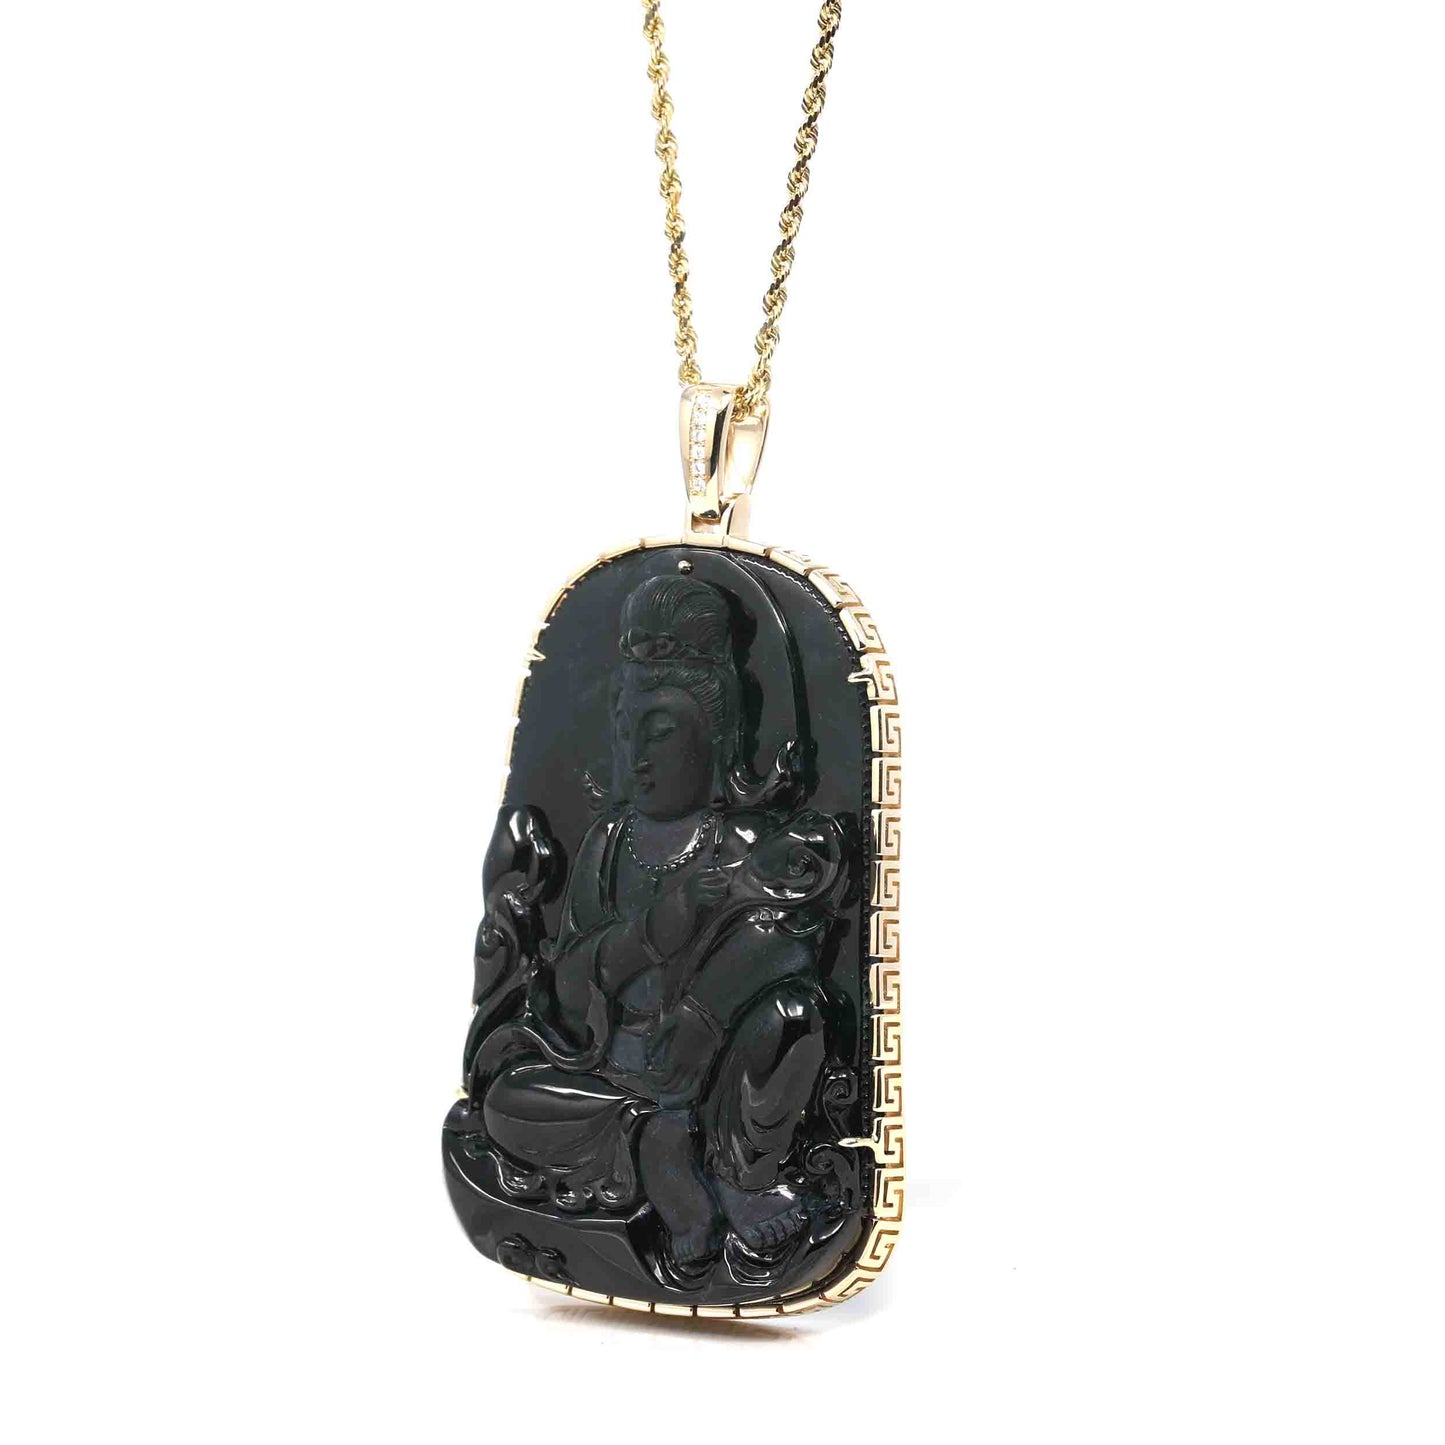 RealJade® Co. 14k Yellow Gold "Goddess of Compassion" Genuine Black Burmese Jadeite Jade Guanyin Necklace With Gold Bail